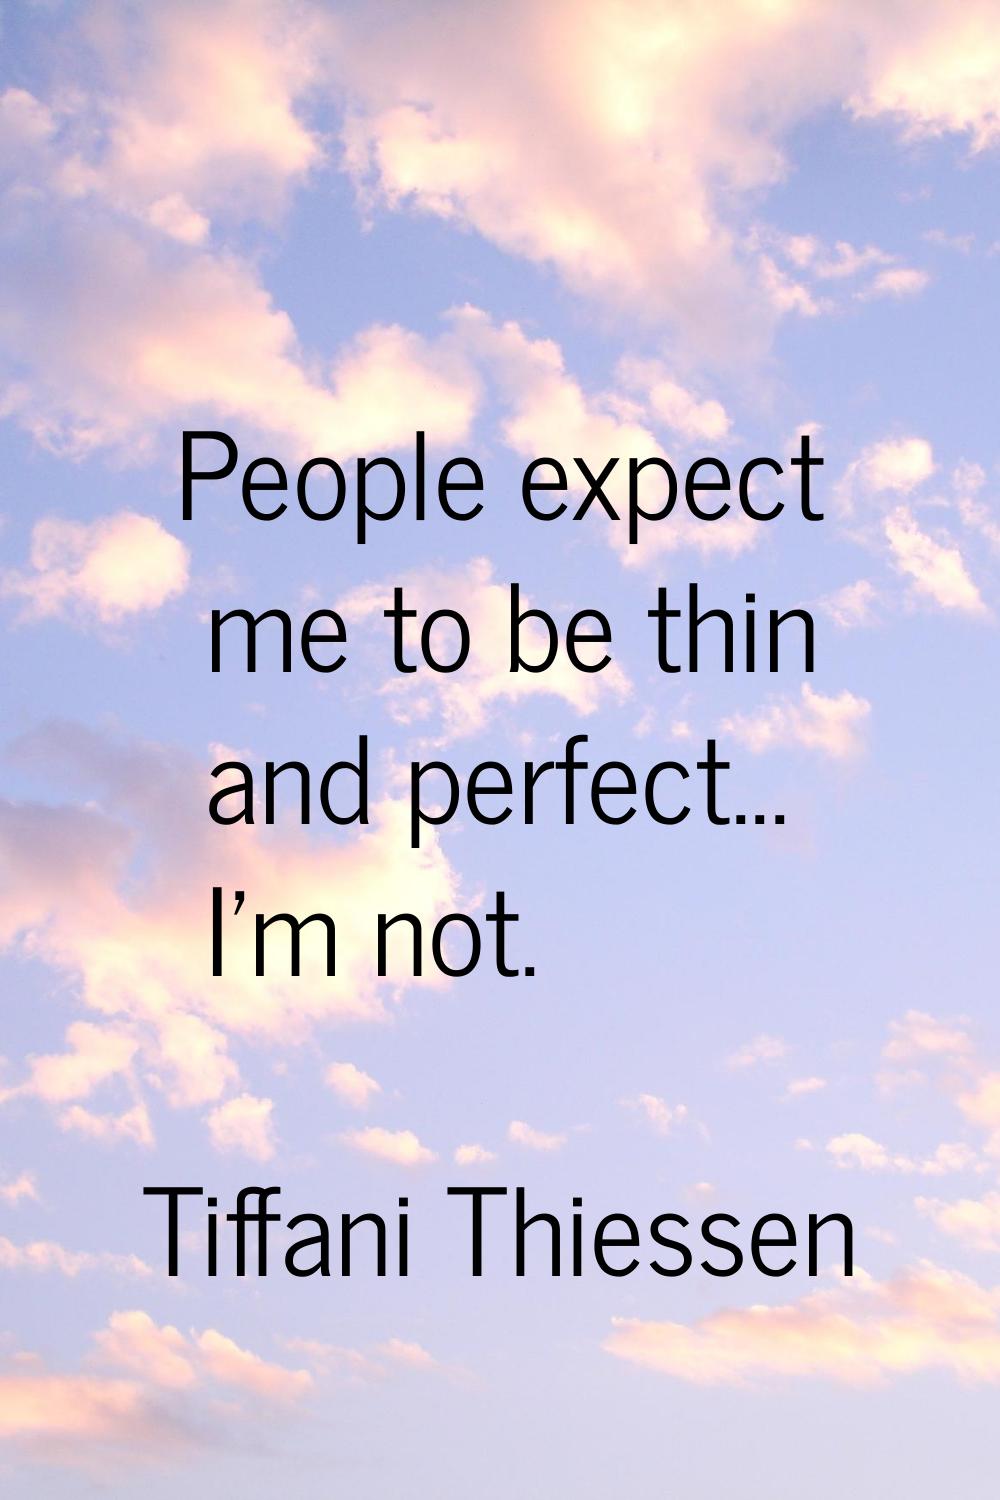 People expect me to be thin and perfect... I'm not.